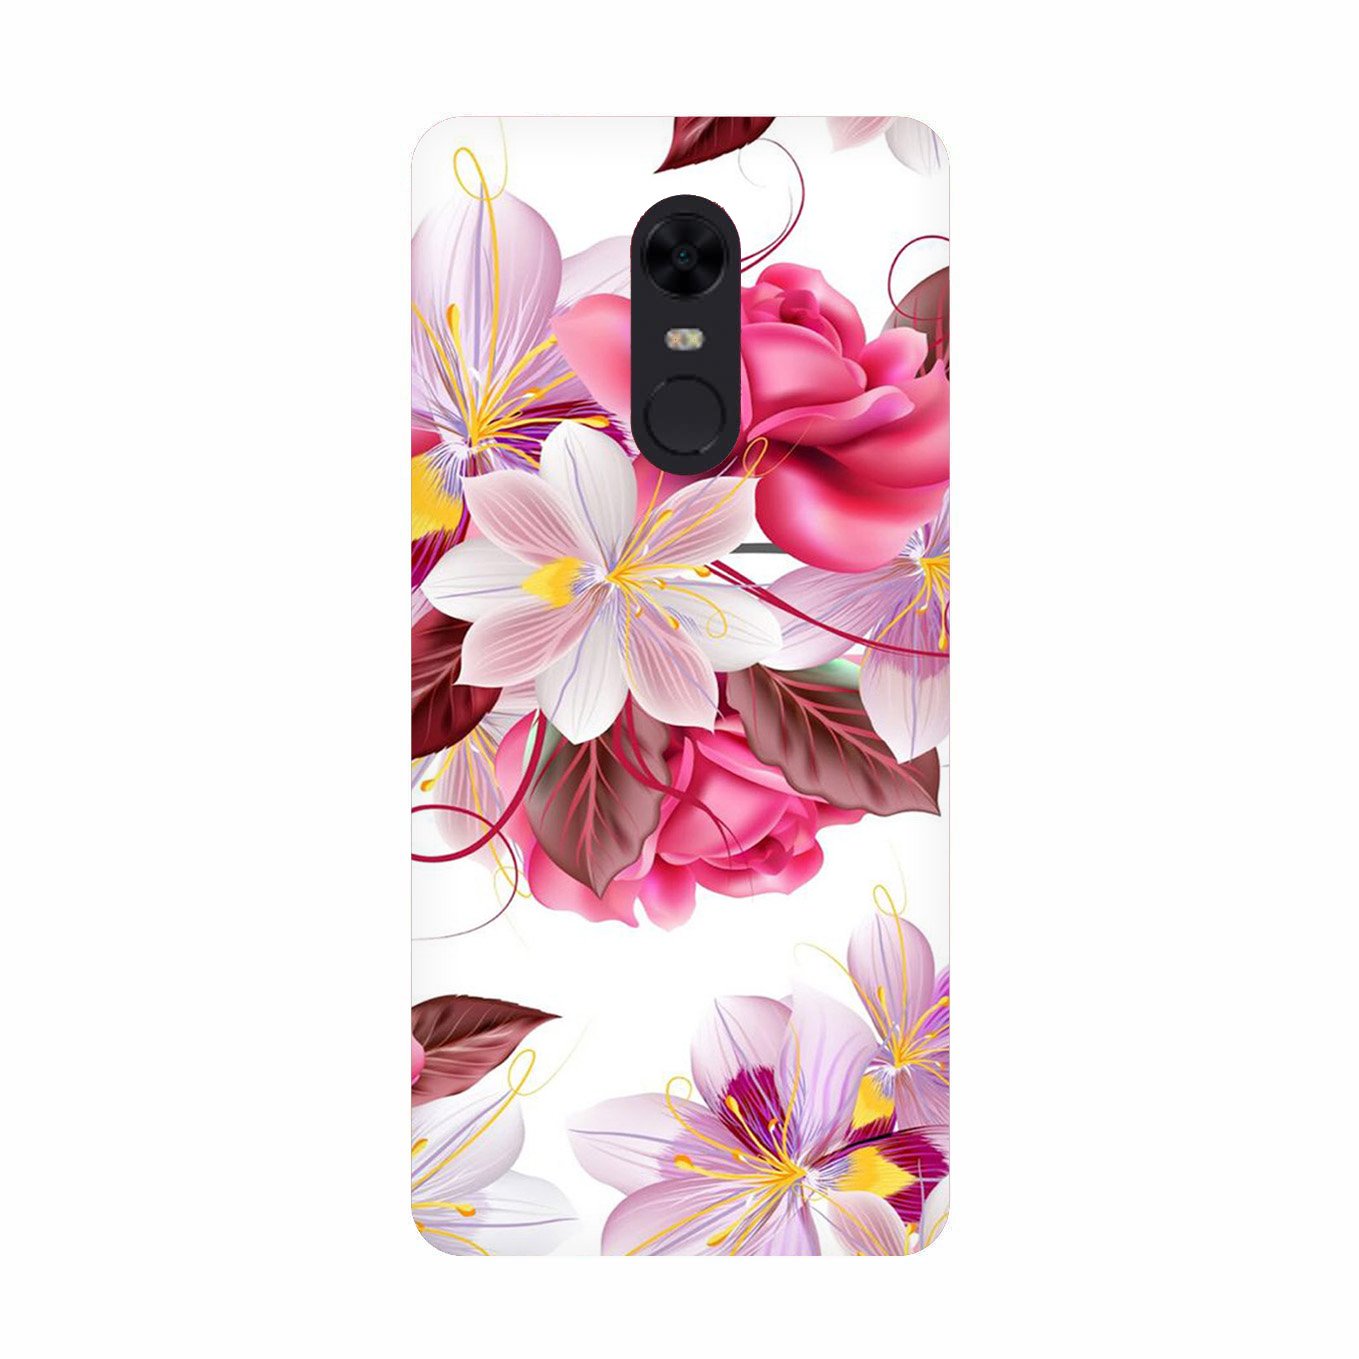 Beautiful flowers Case for Redmi Note 5